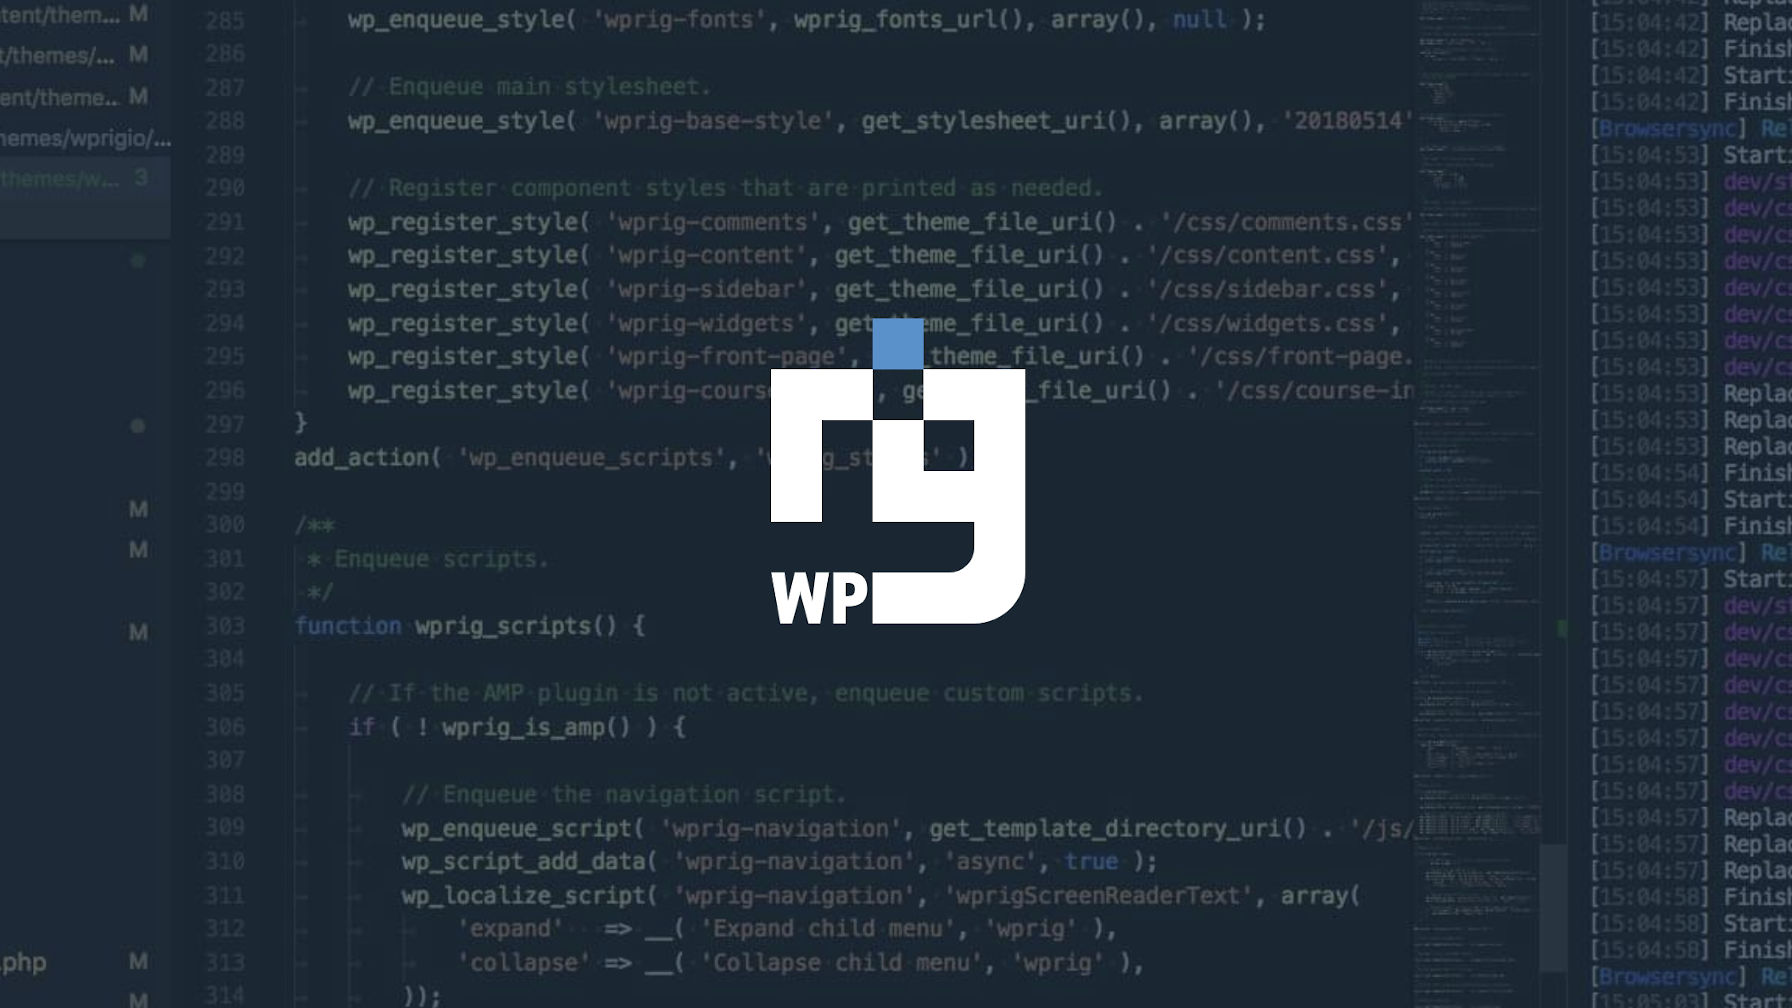 Decorative image of the WP Rig logo with a code editor in the background.